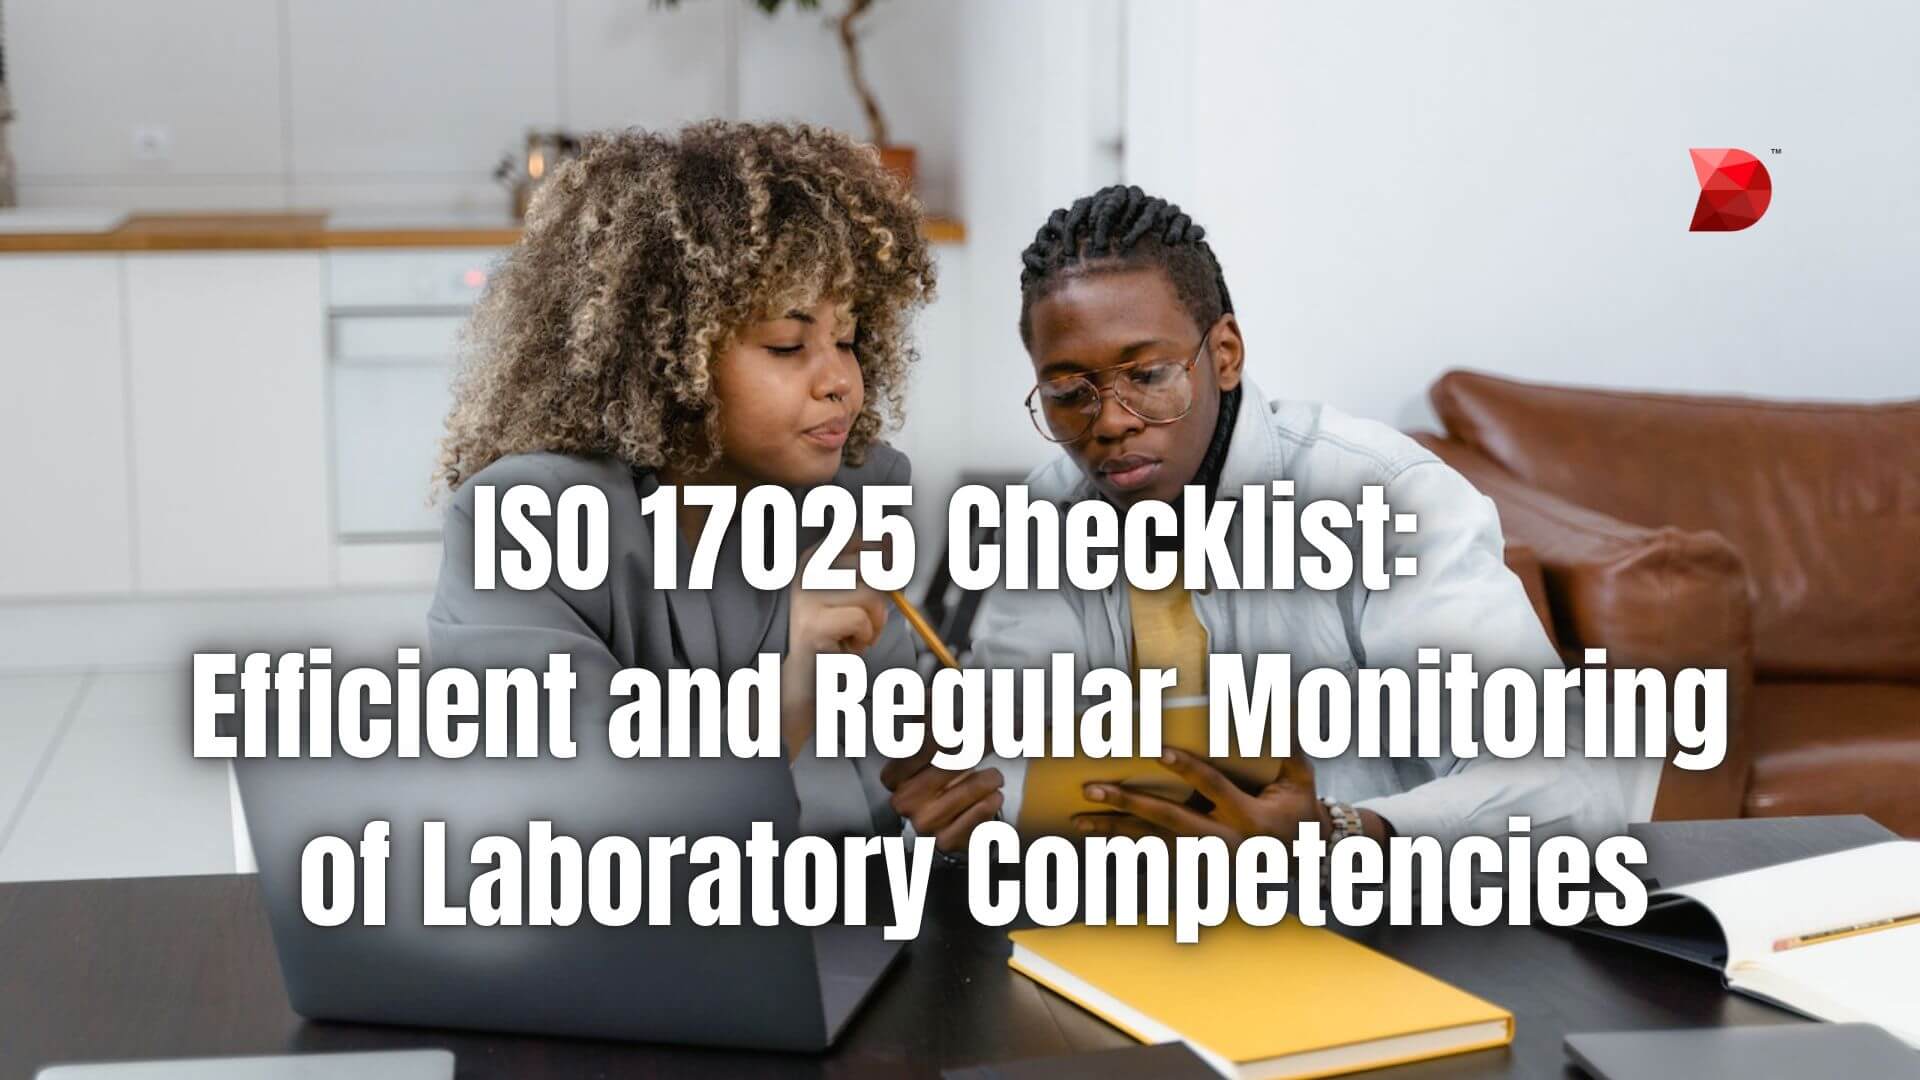 ISO 17025 Checklist Efficient and Regular Monitoring of Laboratory Competencies